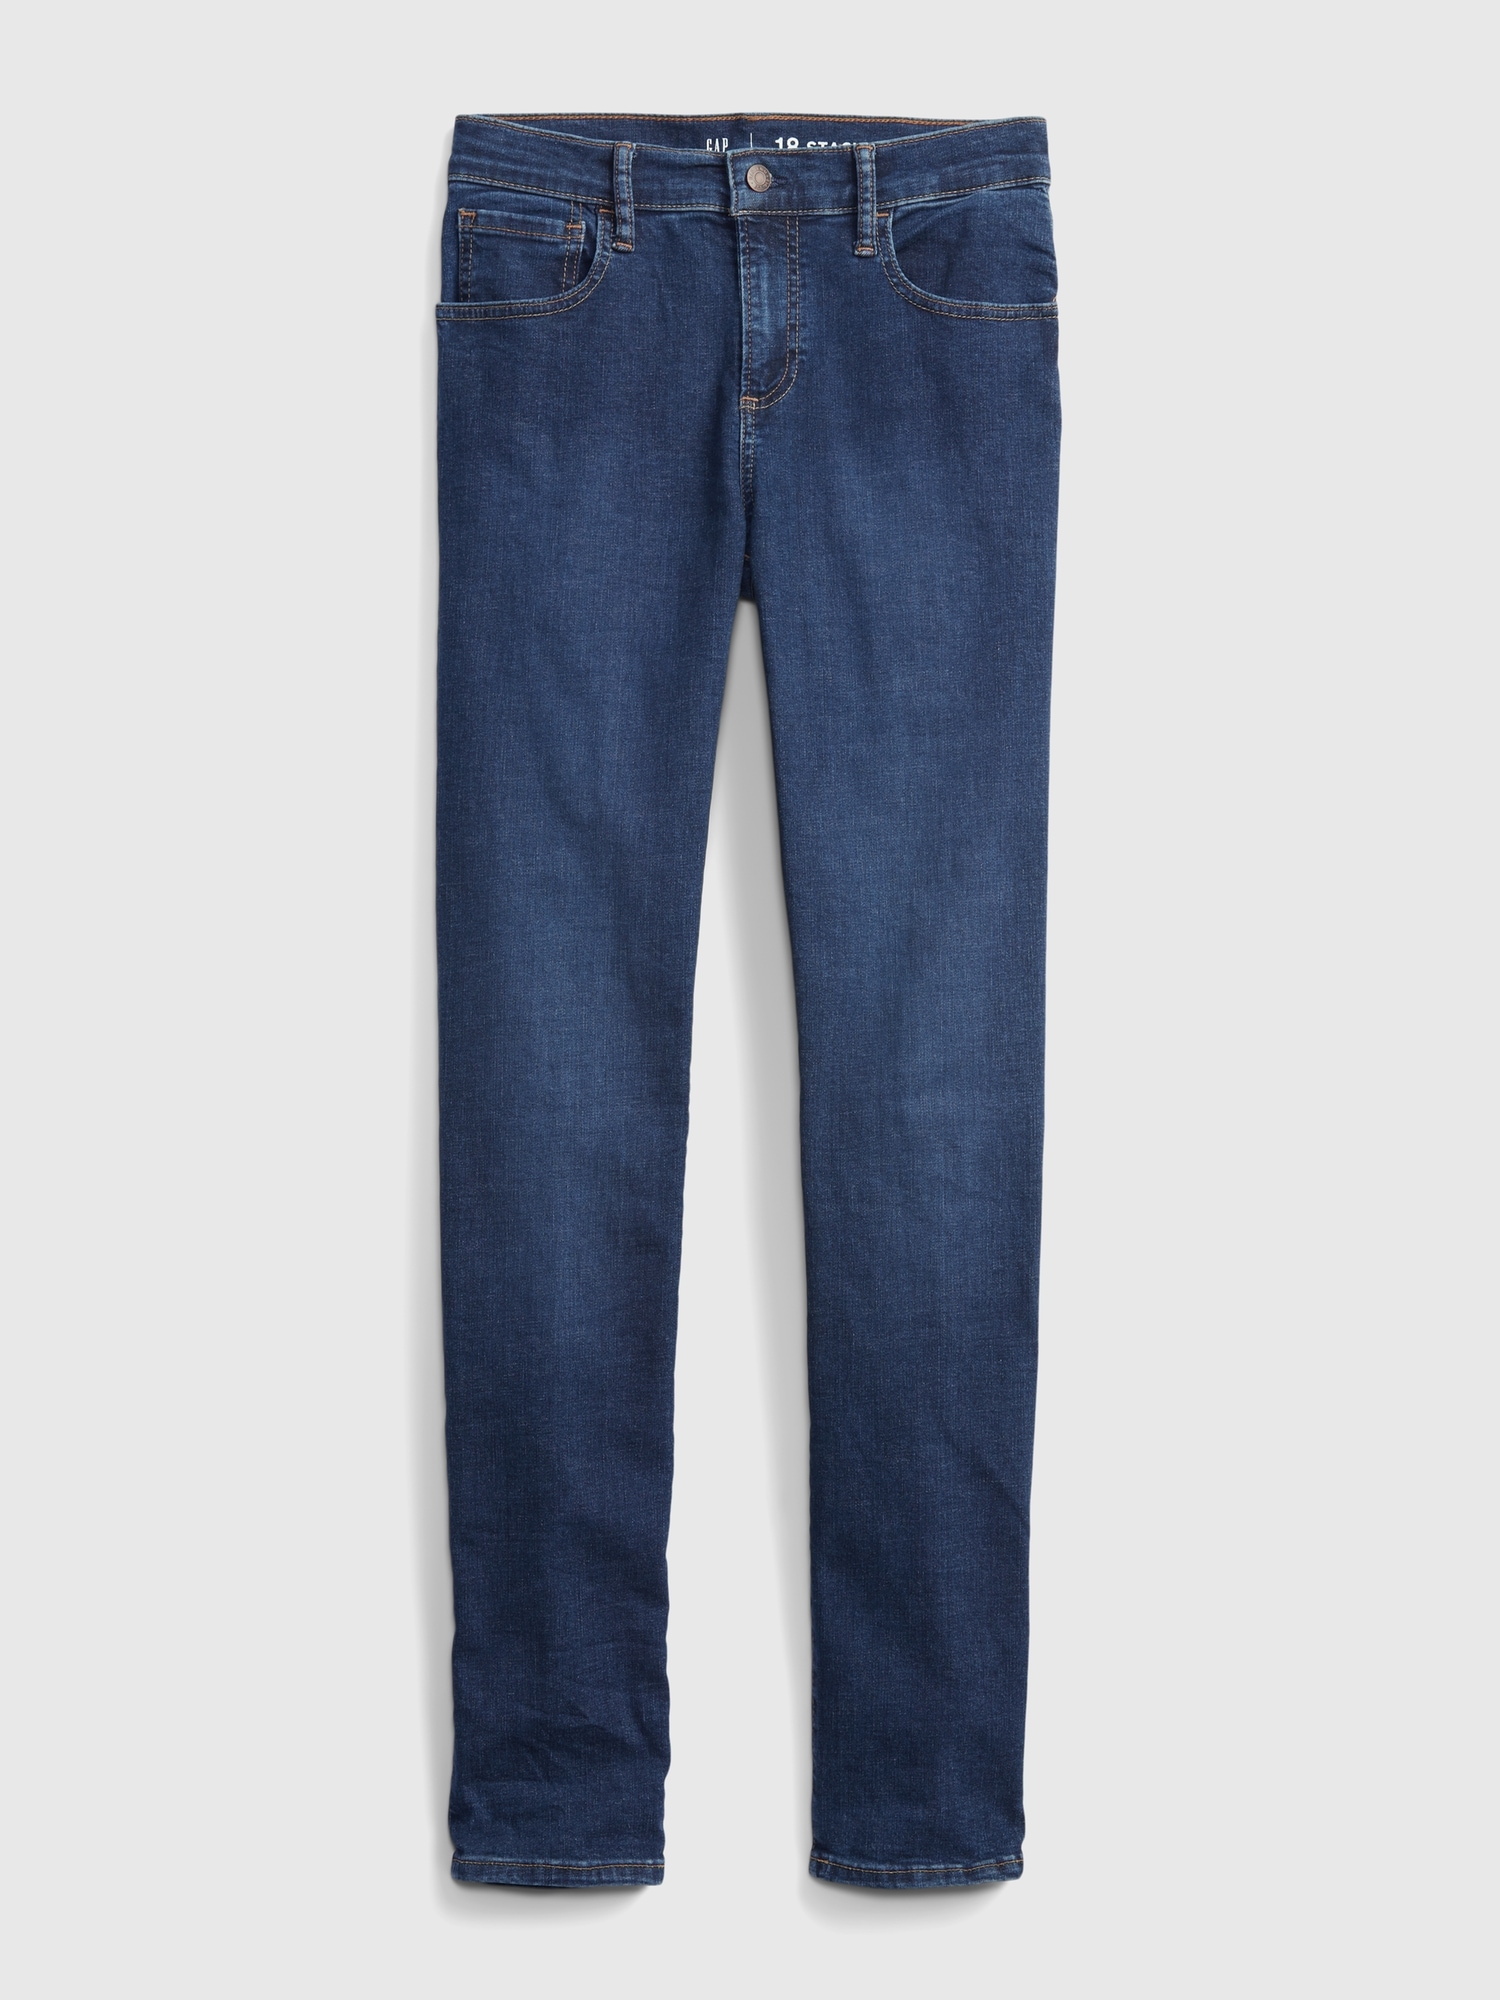 Teen Stacked Ankle Skinny Jeans with Washwell ™ | Gap